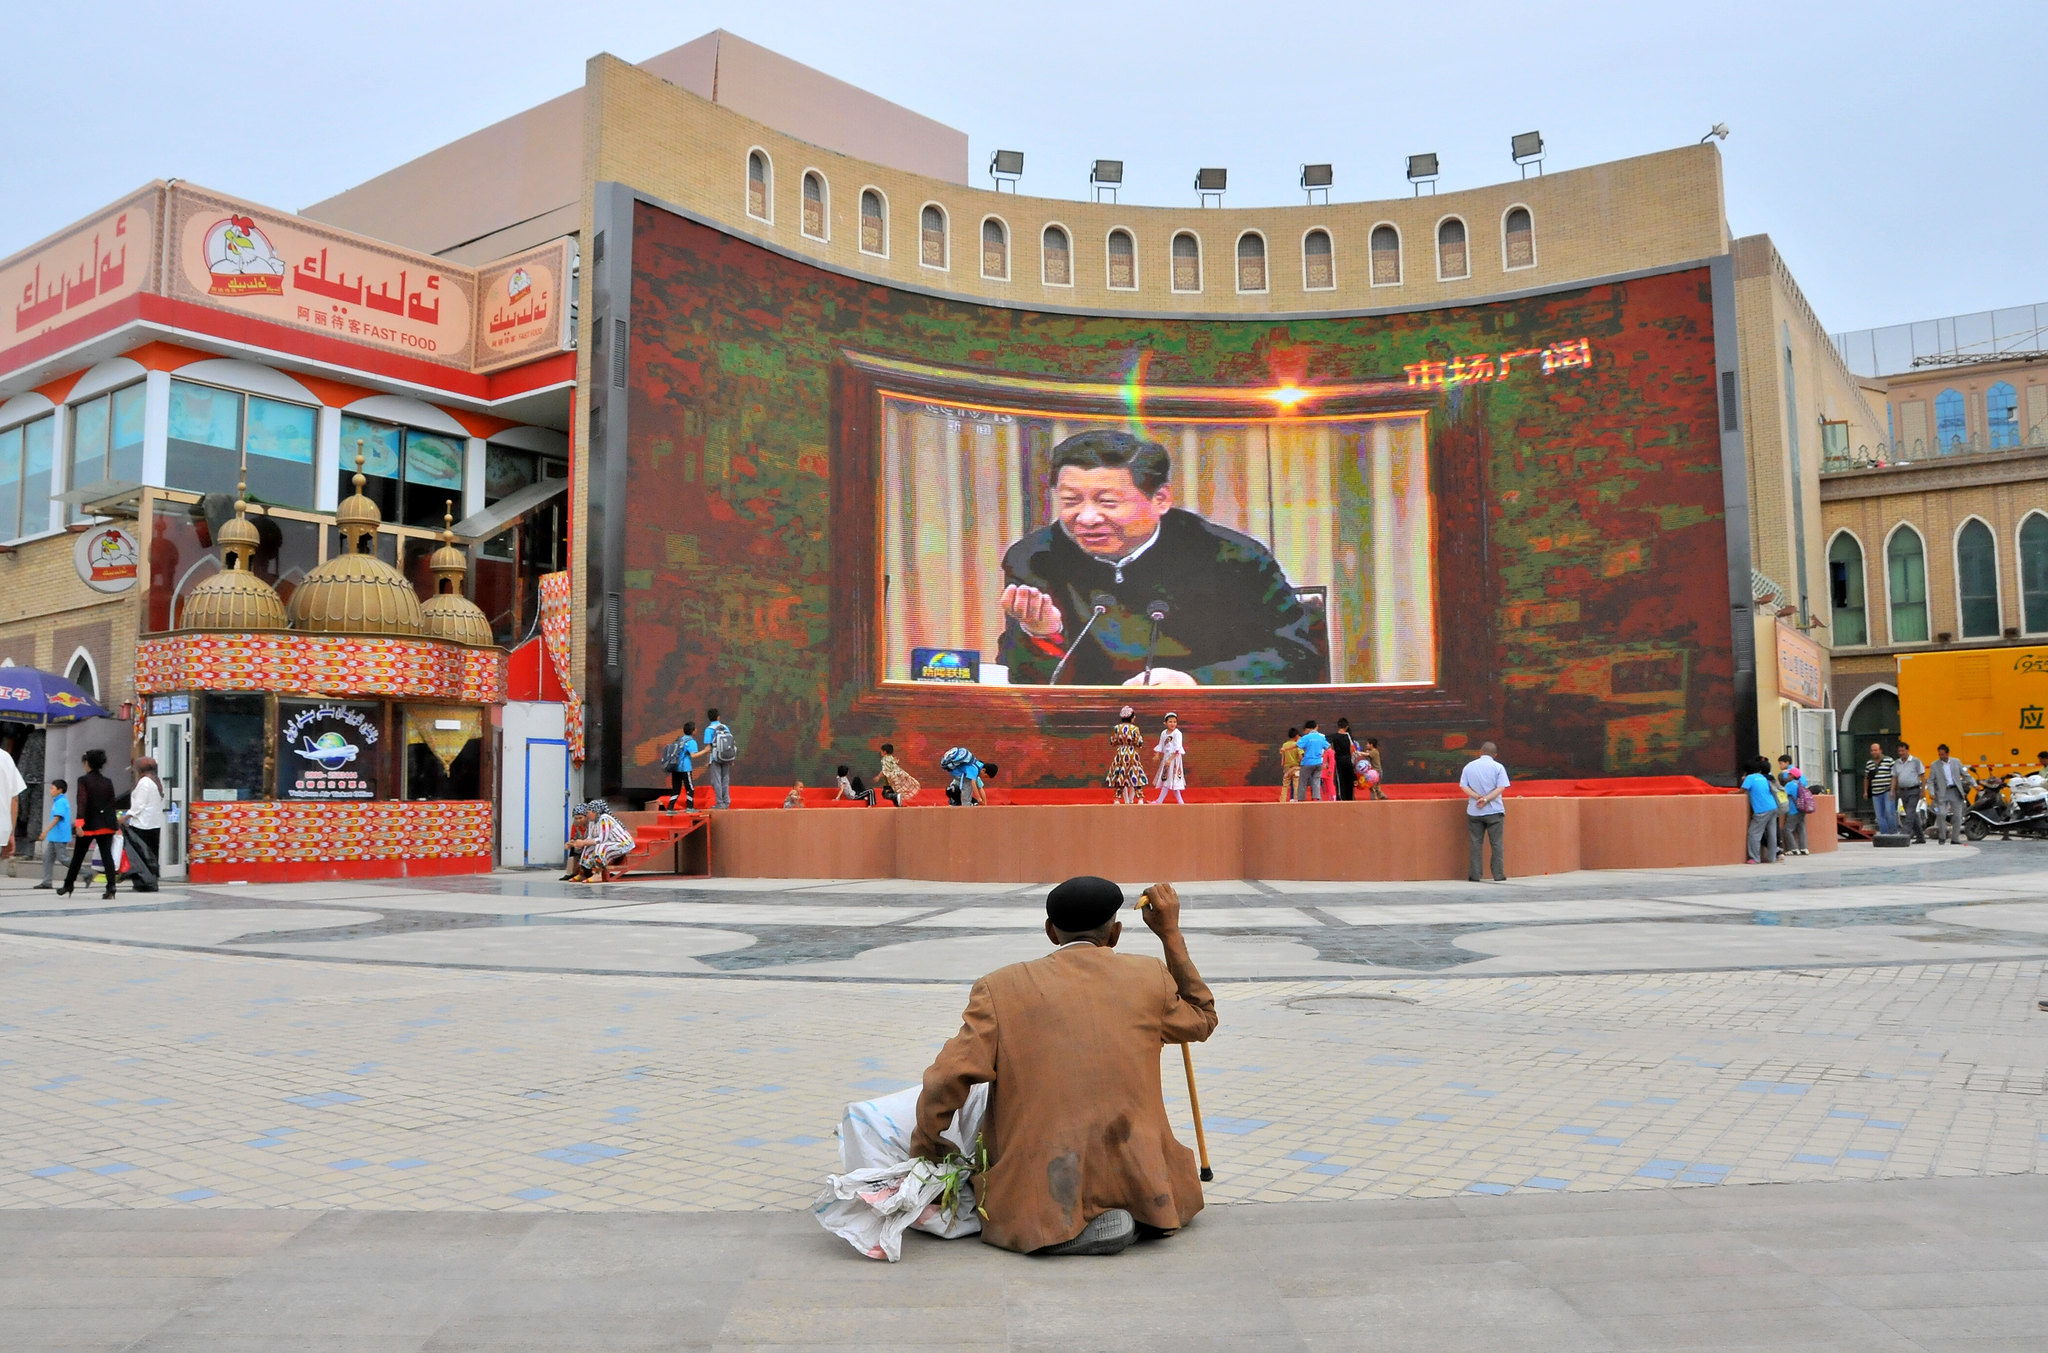 A man watches a recording of Chinese President Xi Jinping outside the Etigar Mosque in Kashgar, Xinjiang, 2015. (Image by Michael Wong)